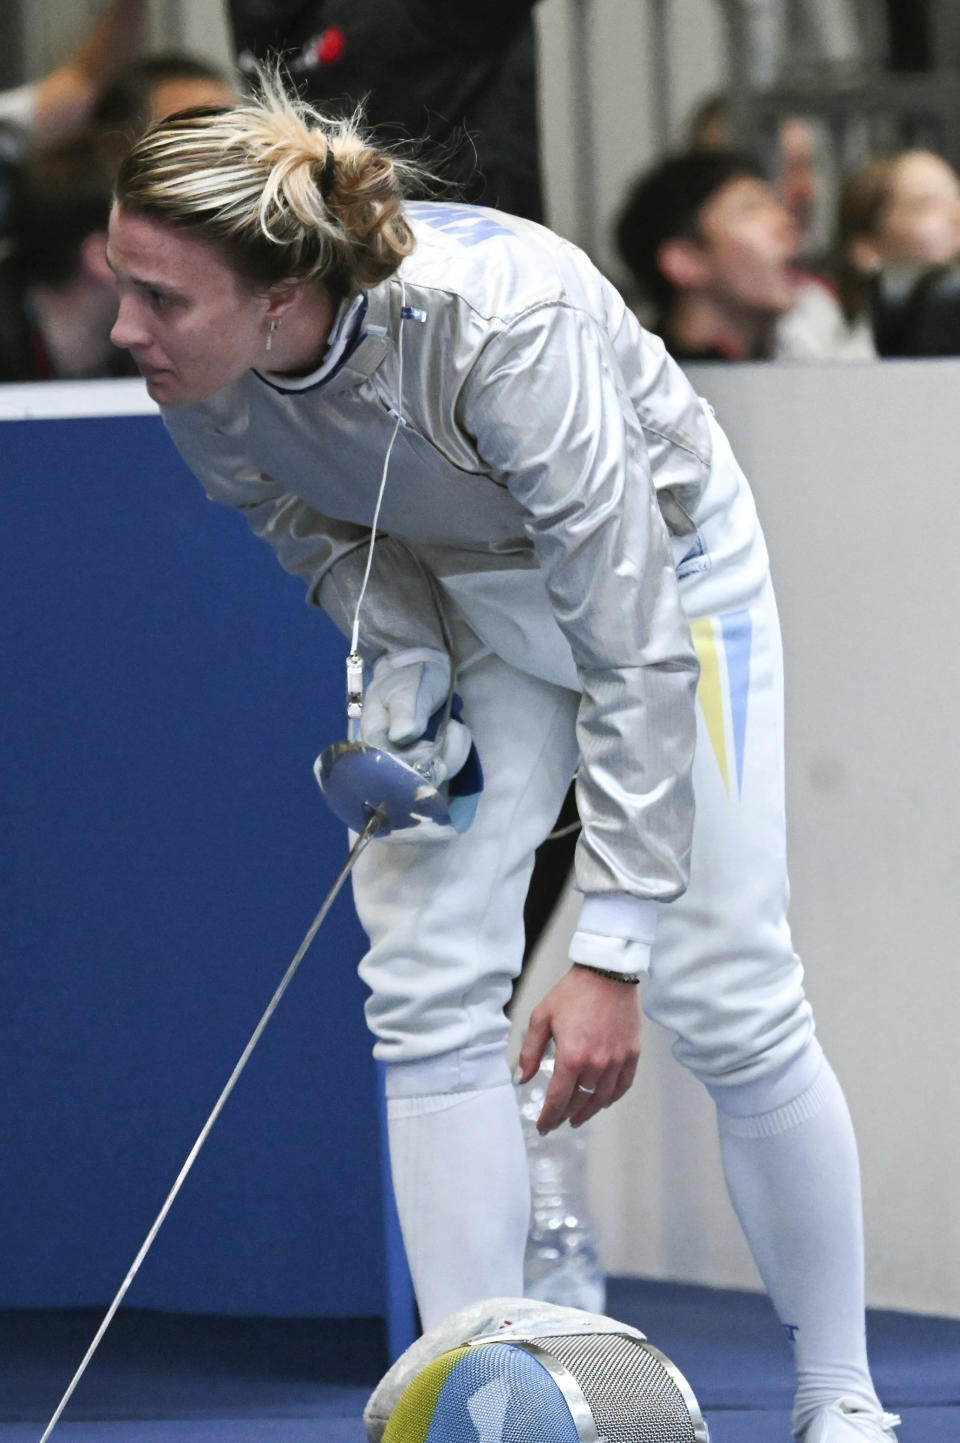 Ukraine's Olga Kharlan leaves after her bout with Russia's Anna Smirnova in the women's individual sabre best of 64 round match, during the FIE World Fencing Championship, in Milan, Italy, Thursday, July 27, 2023. Olympic champion Kharlan competed against officially-neutral Russian opponent Smirnova at the world fencing championships, an Olympic qualifier, on Thursday in Milan, Italy, winning their bout 15-7. However, Smirnova refused to leave after the bout in an apparent protest because Kharlan refused to shake hands at the end. (Tibor Illyes/MTI via AP)